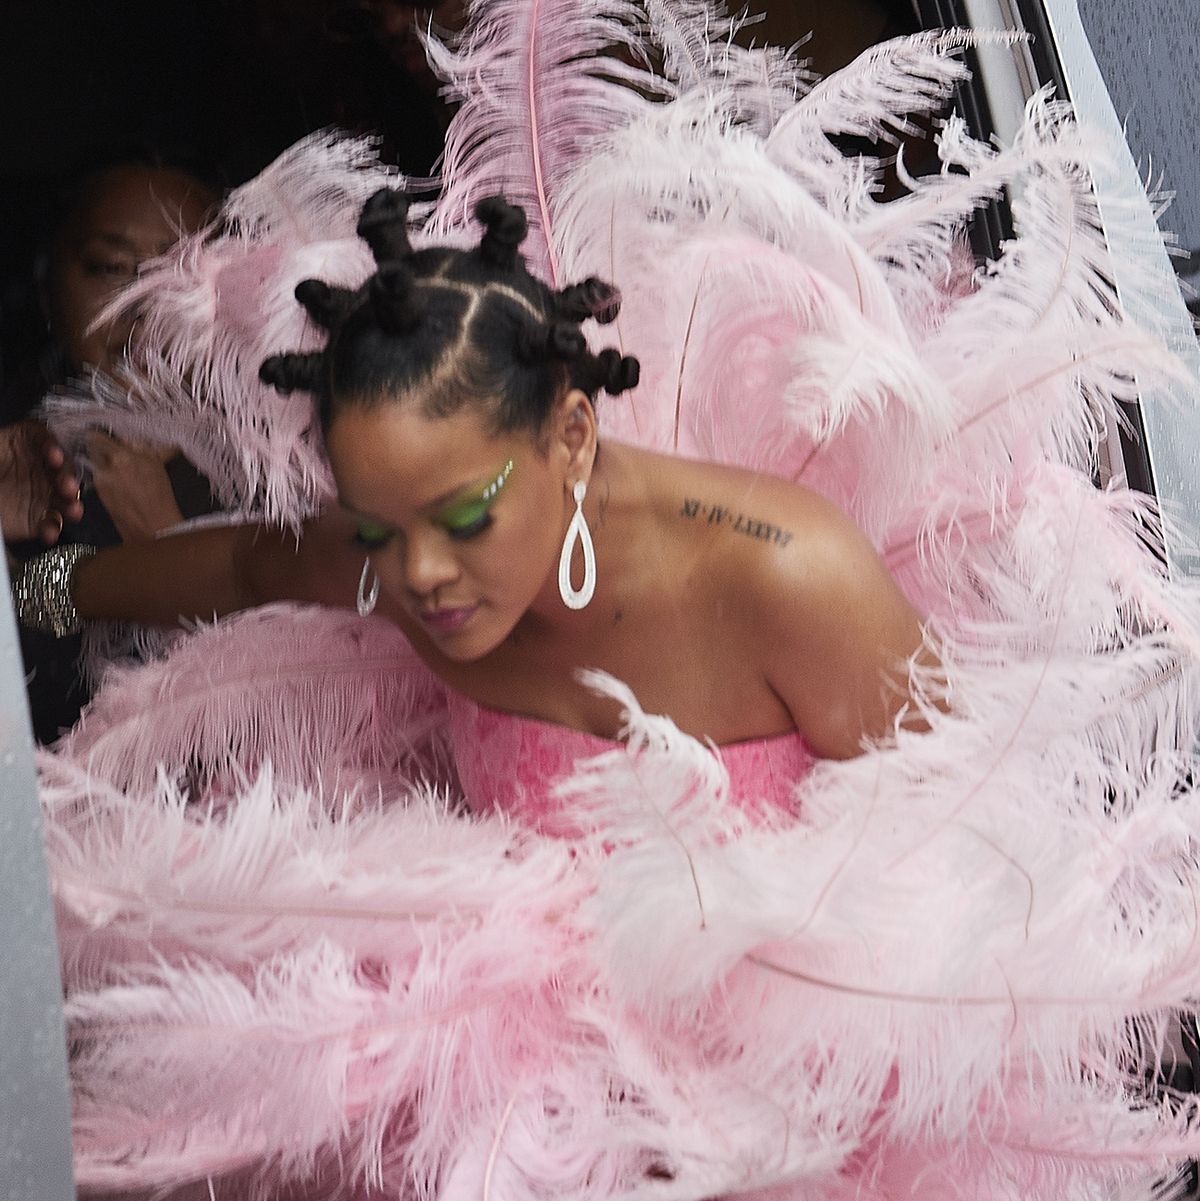 Rihanna Stuns In A Bright Pink Feathered Costume To Kick Off The Annual Crop Over Festival In Barbados